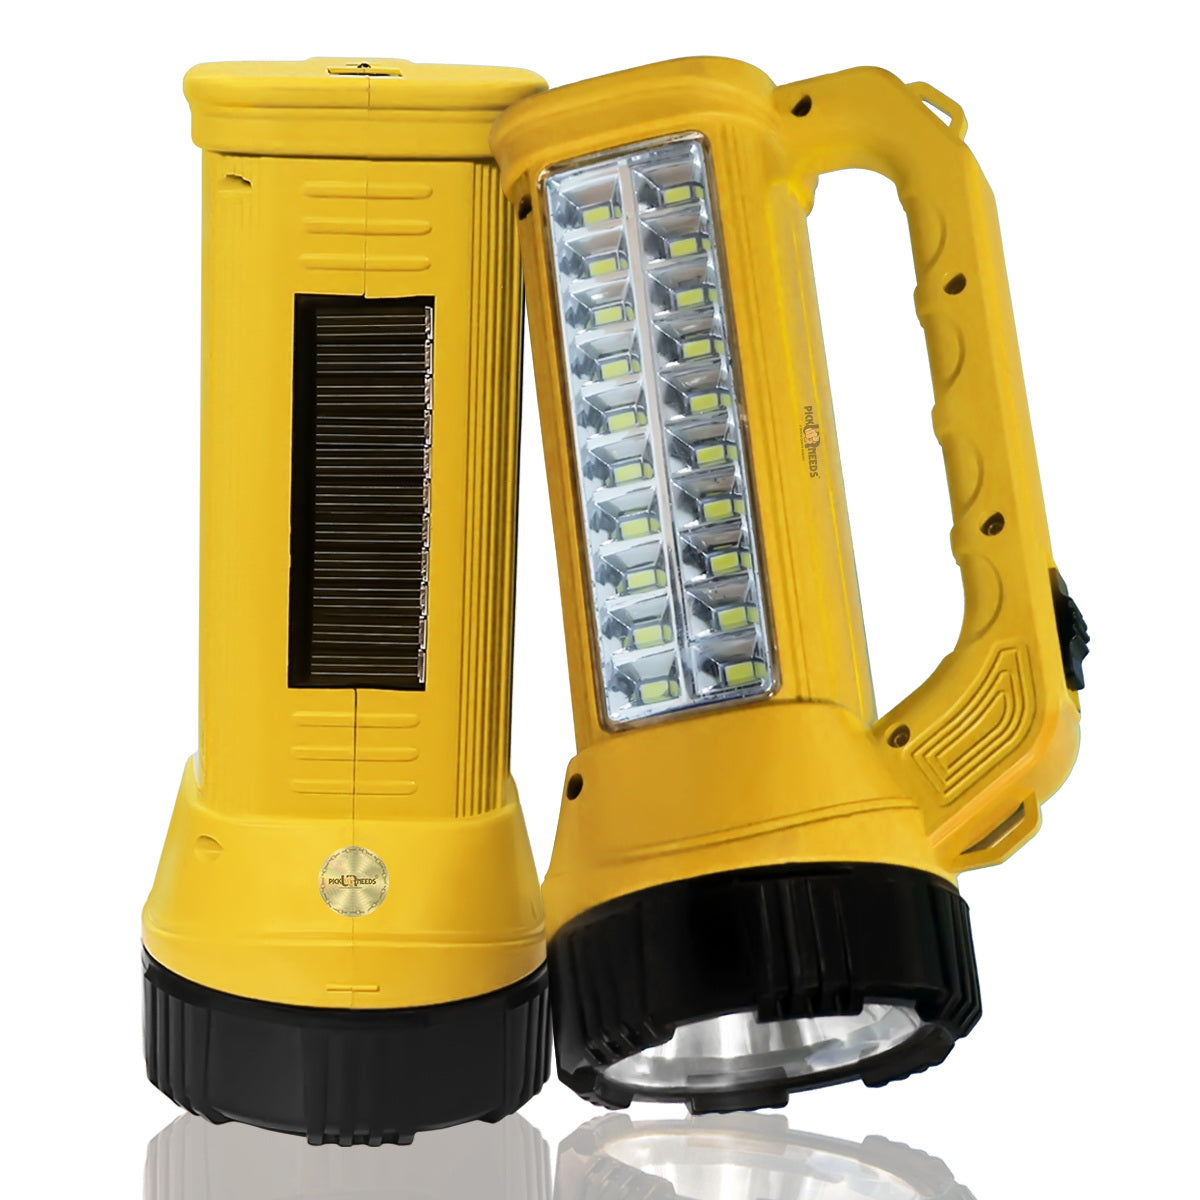 Rechargeable LED Long range Search Light with Waterproof 6 Hrs Emergency Torch Light